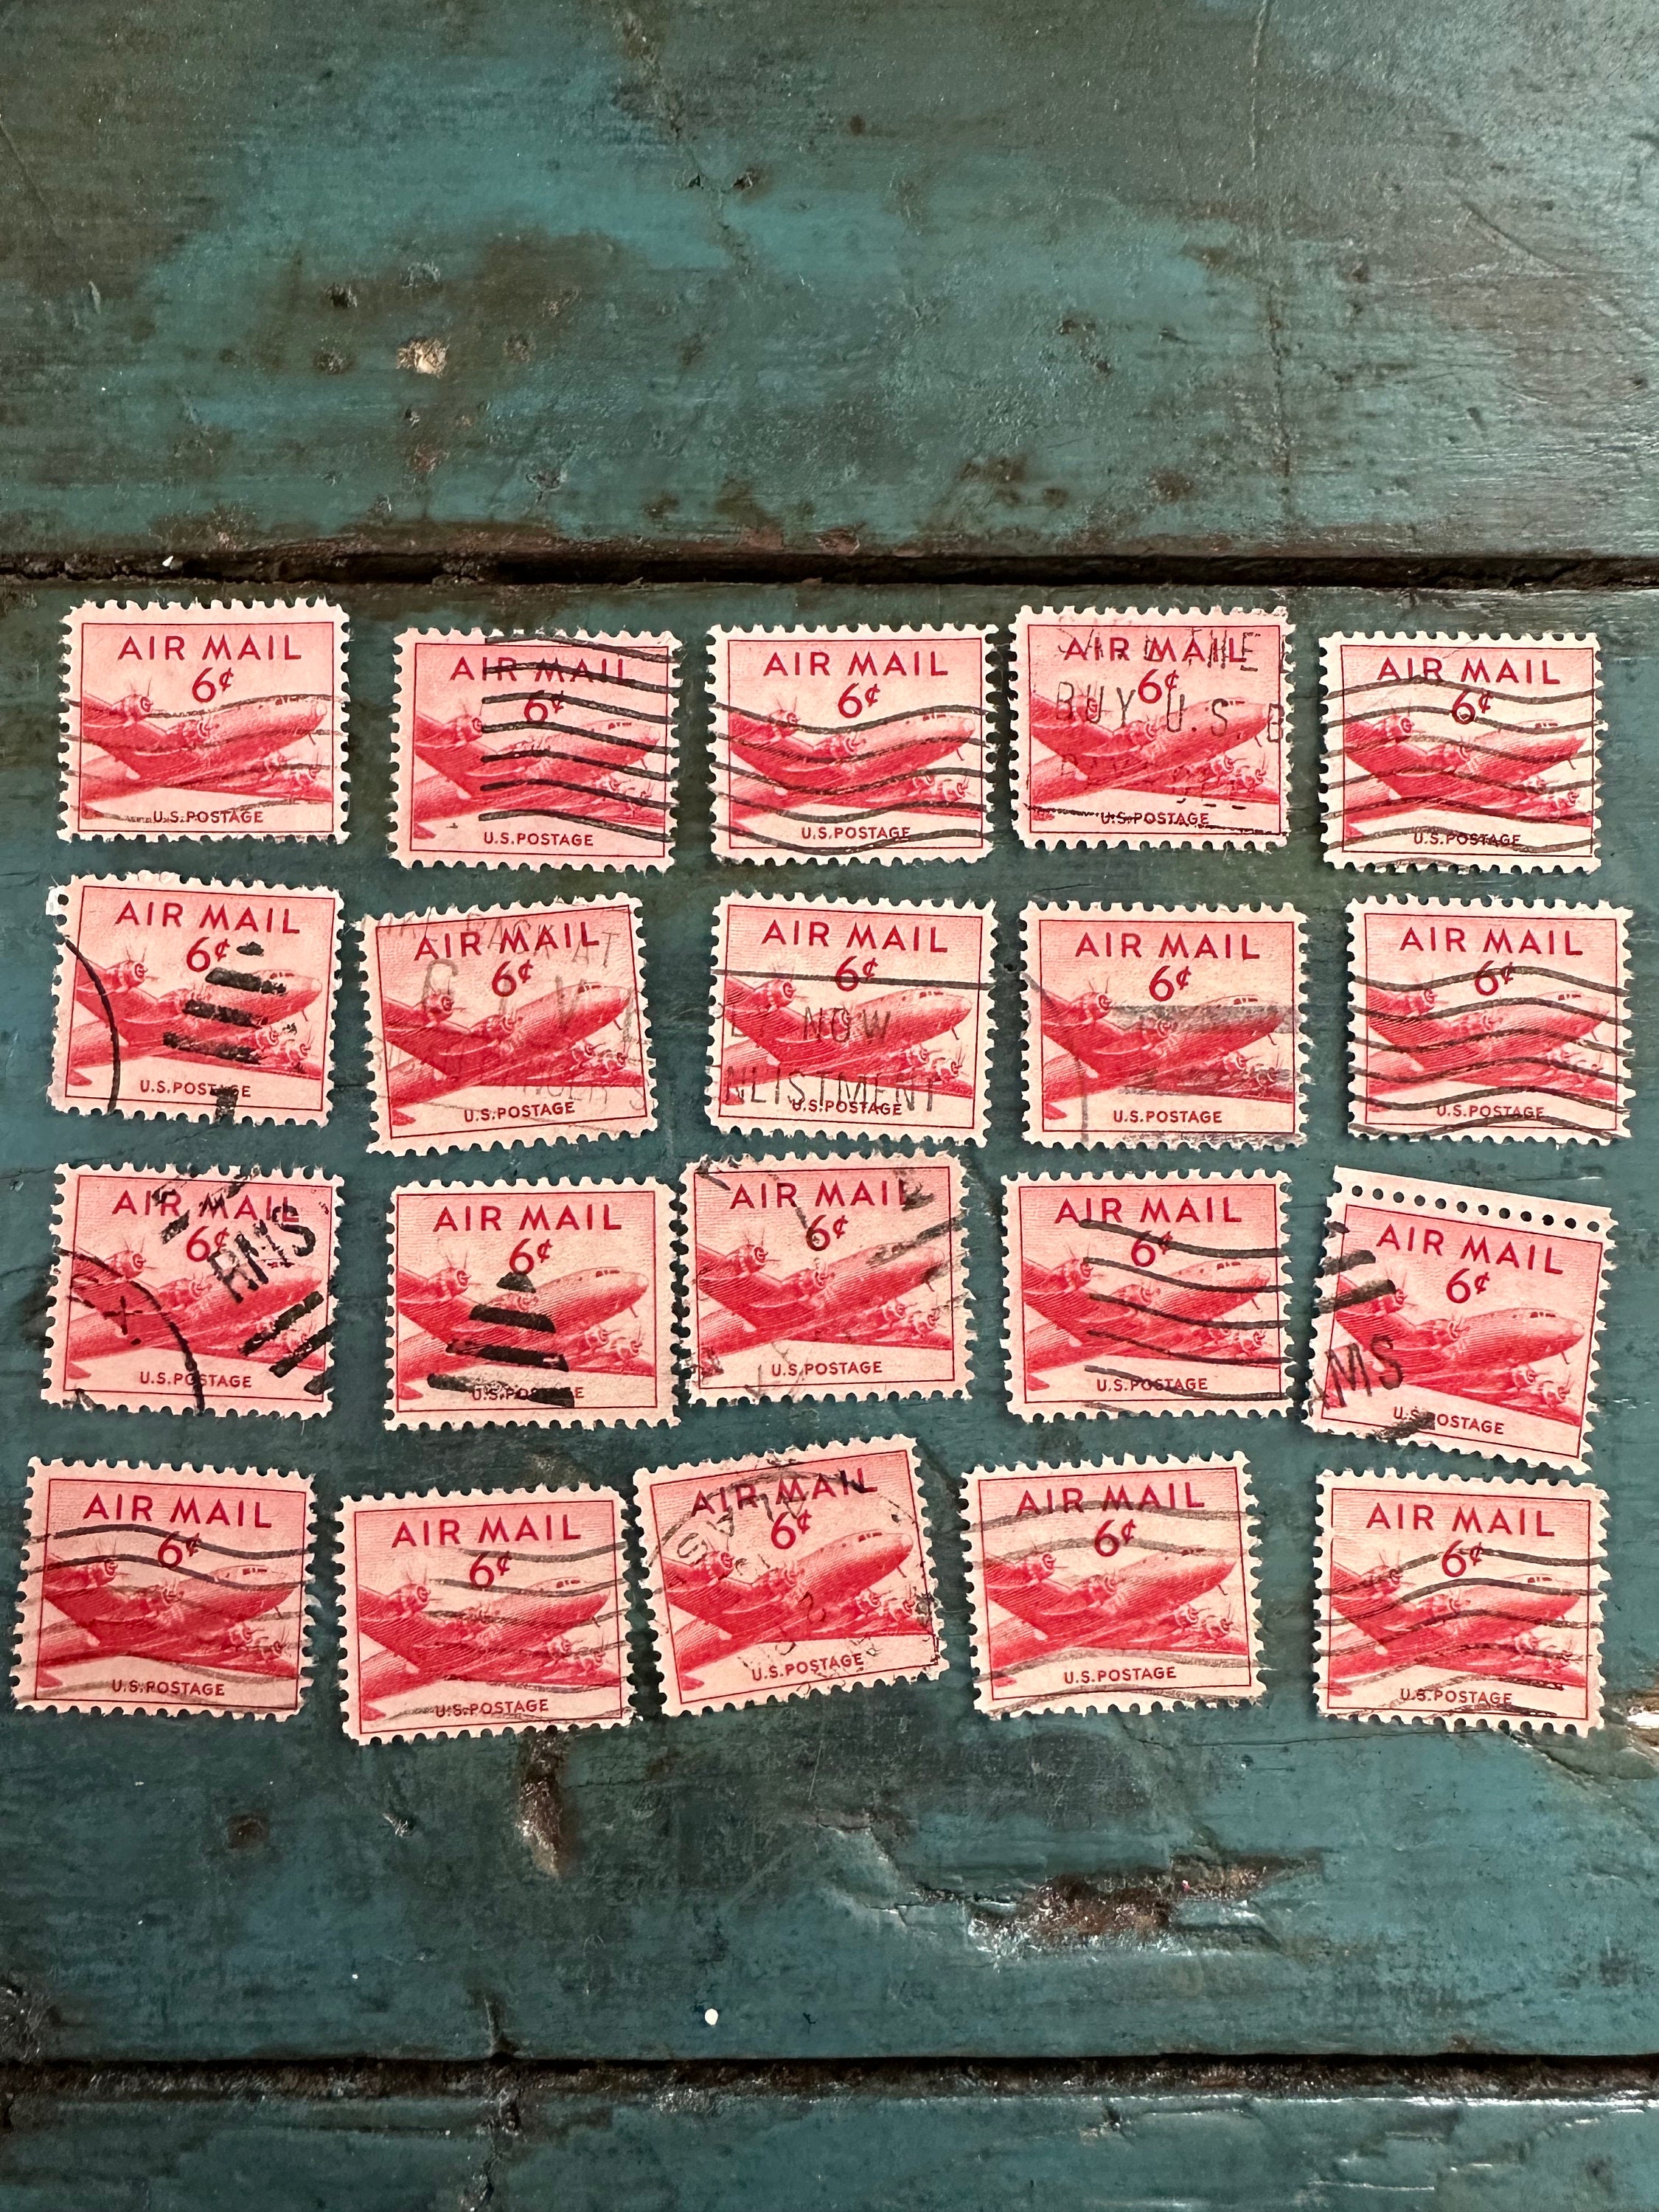 Blue Jet Airliner Booklet of Twelve 7-Cent US Air Mail Postage Stamps  Issued 1958